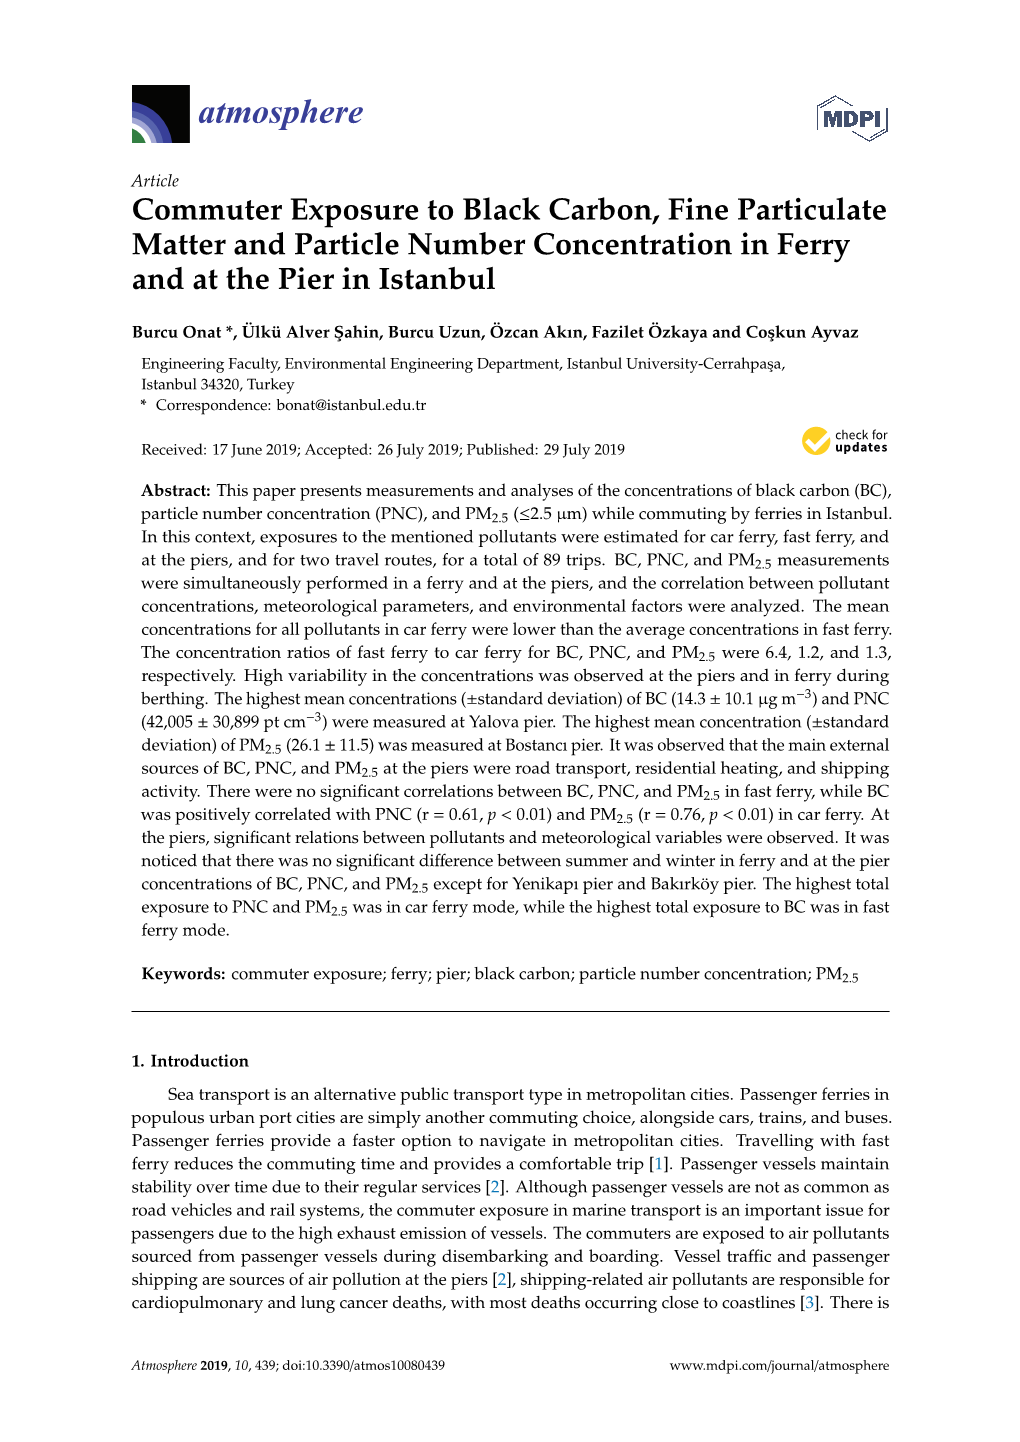 Commuter Exposure to Black Carbon, Fine Particulate Matter and Particle Number Concentration in Ferry and at the Pier in Istanbul